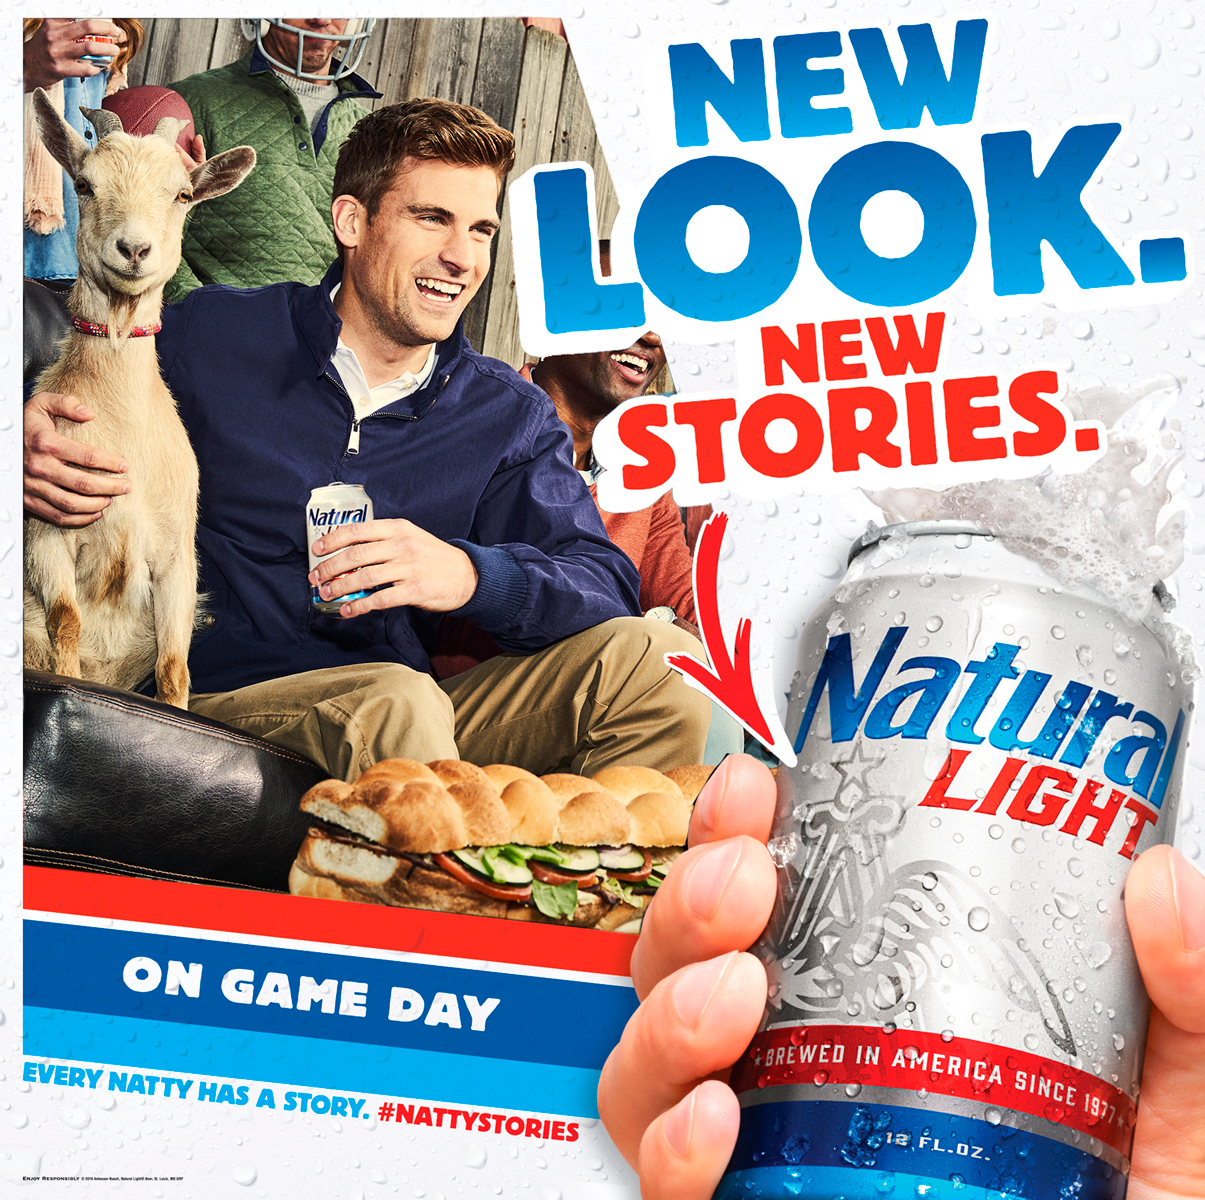 NATURAL LIGHT BEER "Every Natty Has A Story"